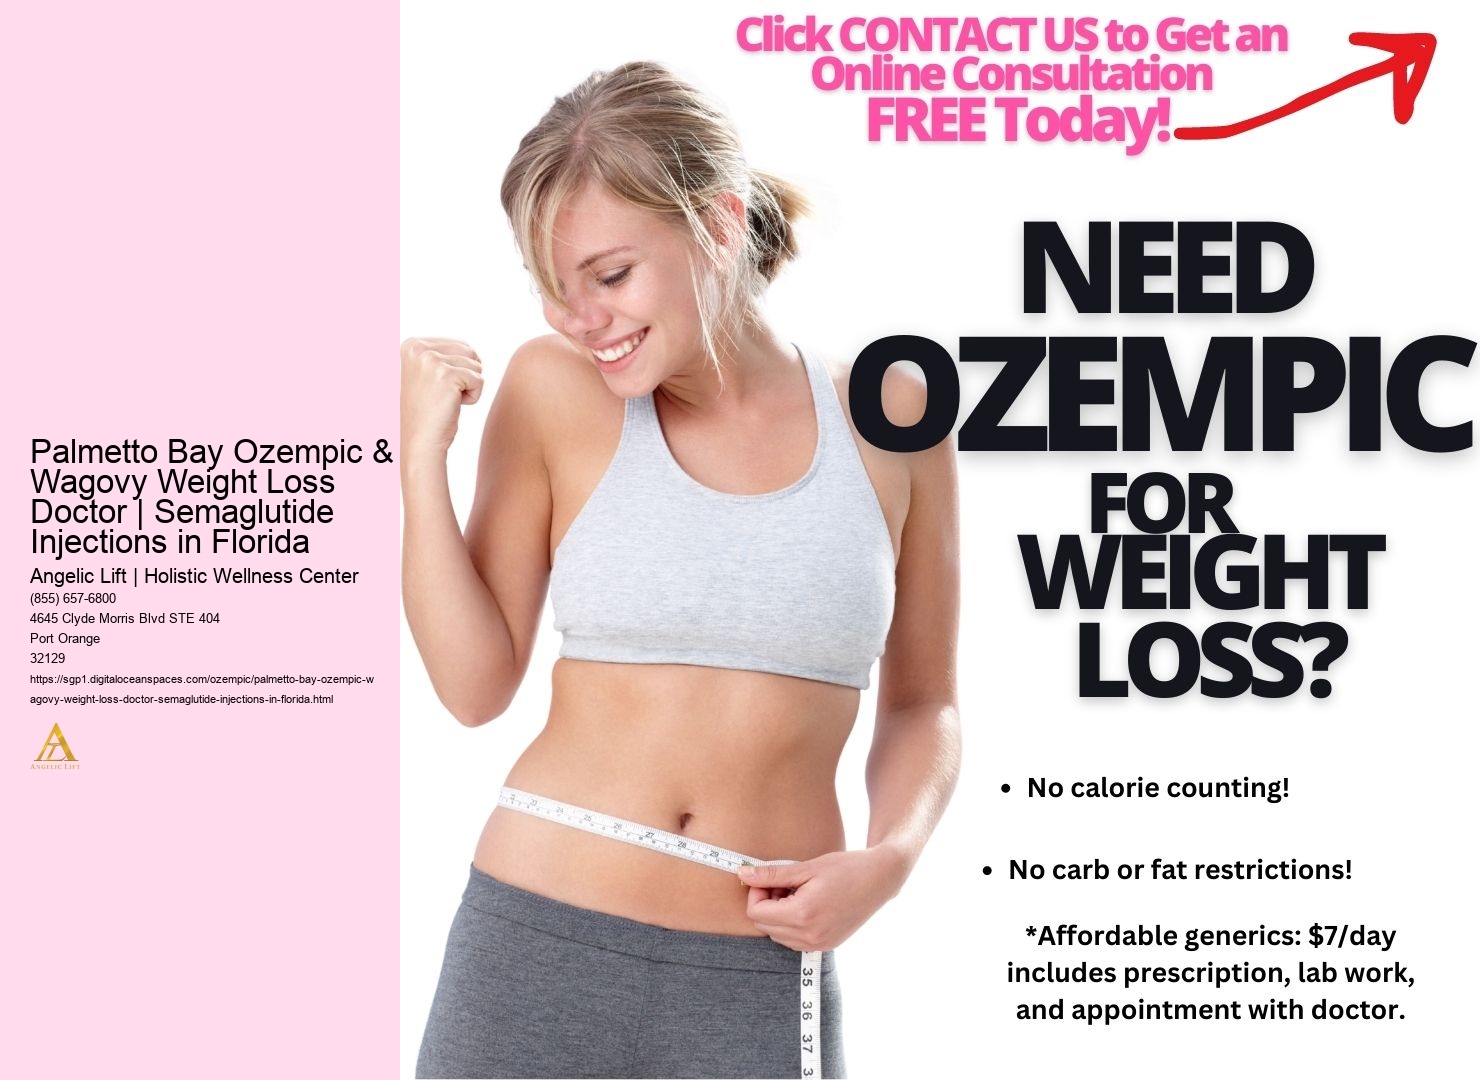 Palmetto Bay Ozempic & Wagovy Weight Loss Doctor | Semaglutide Injections in Florida